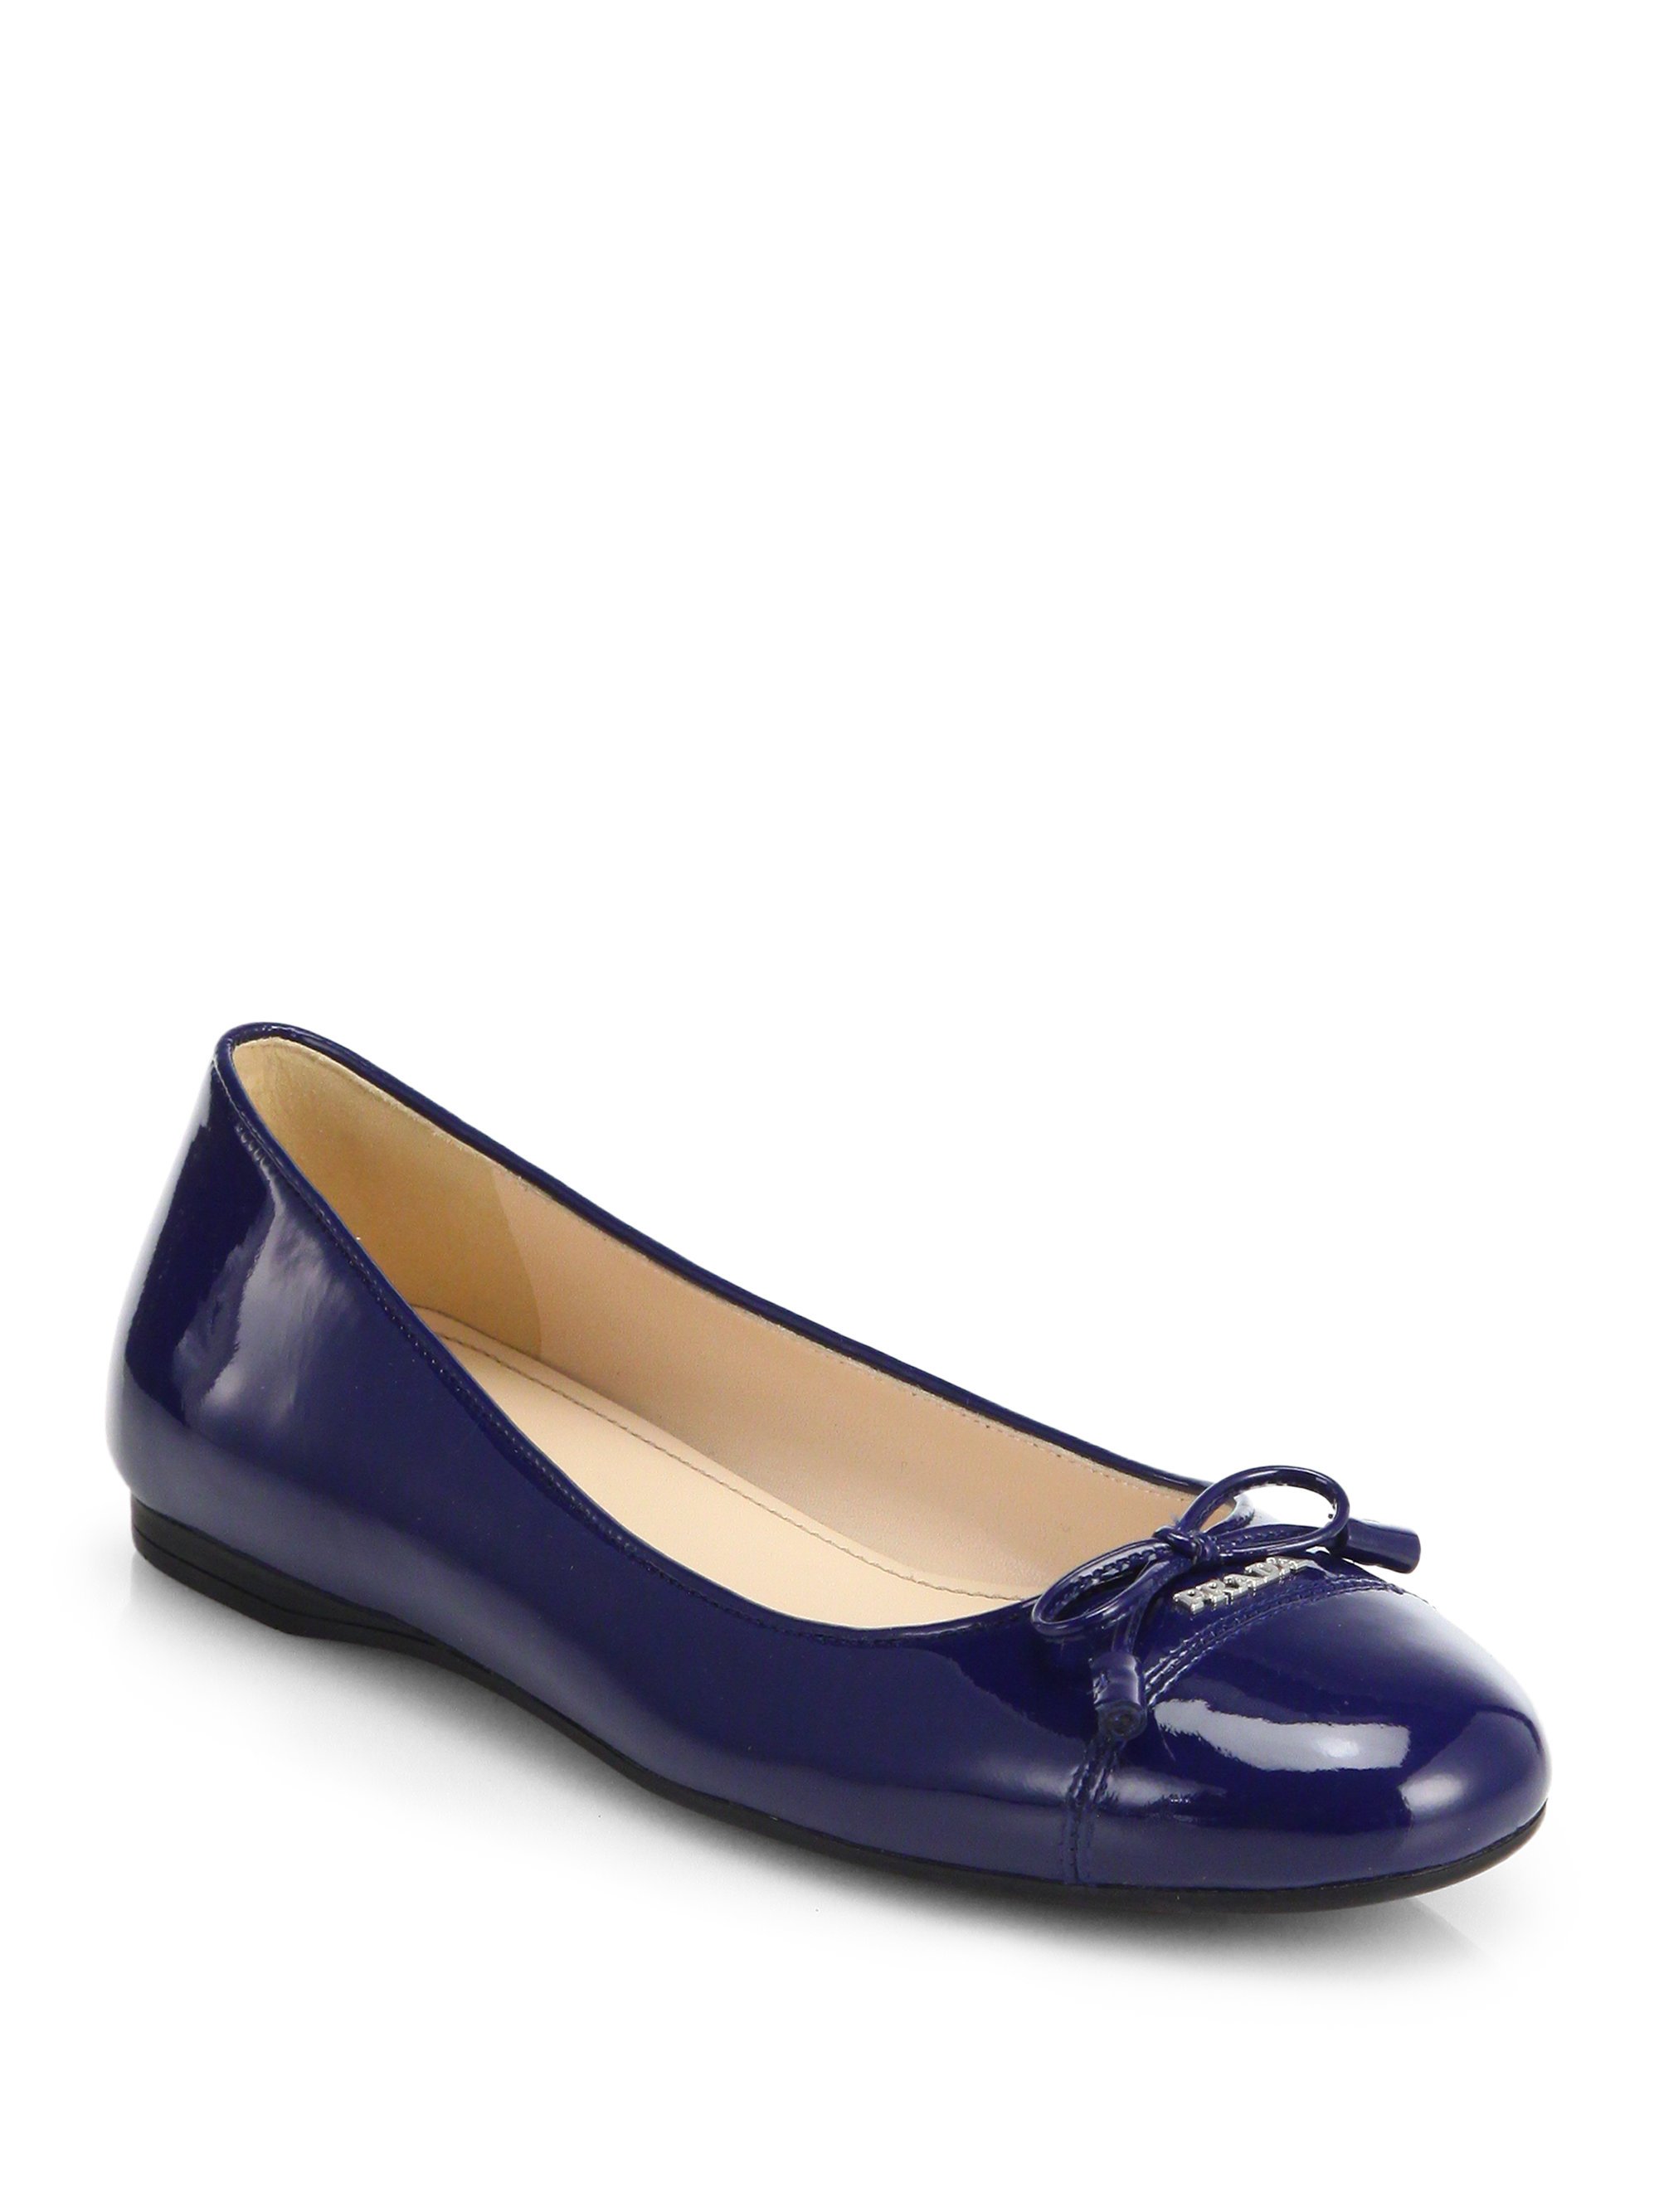 Lyst Prada Patent Leather Bow Ballet Flats In Blue